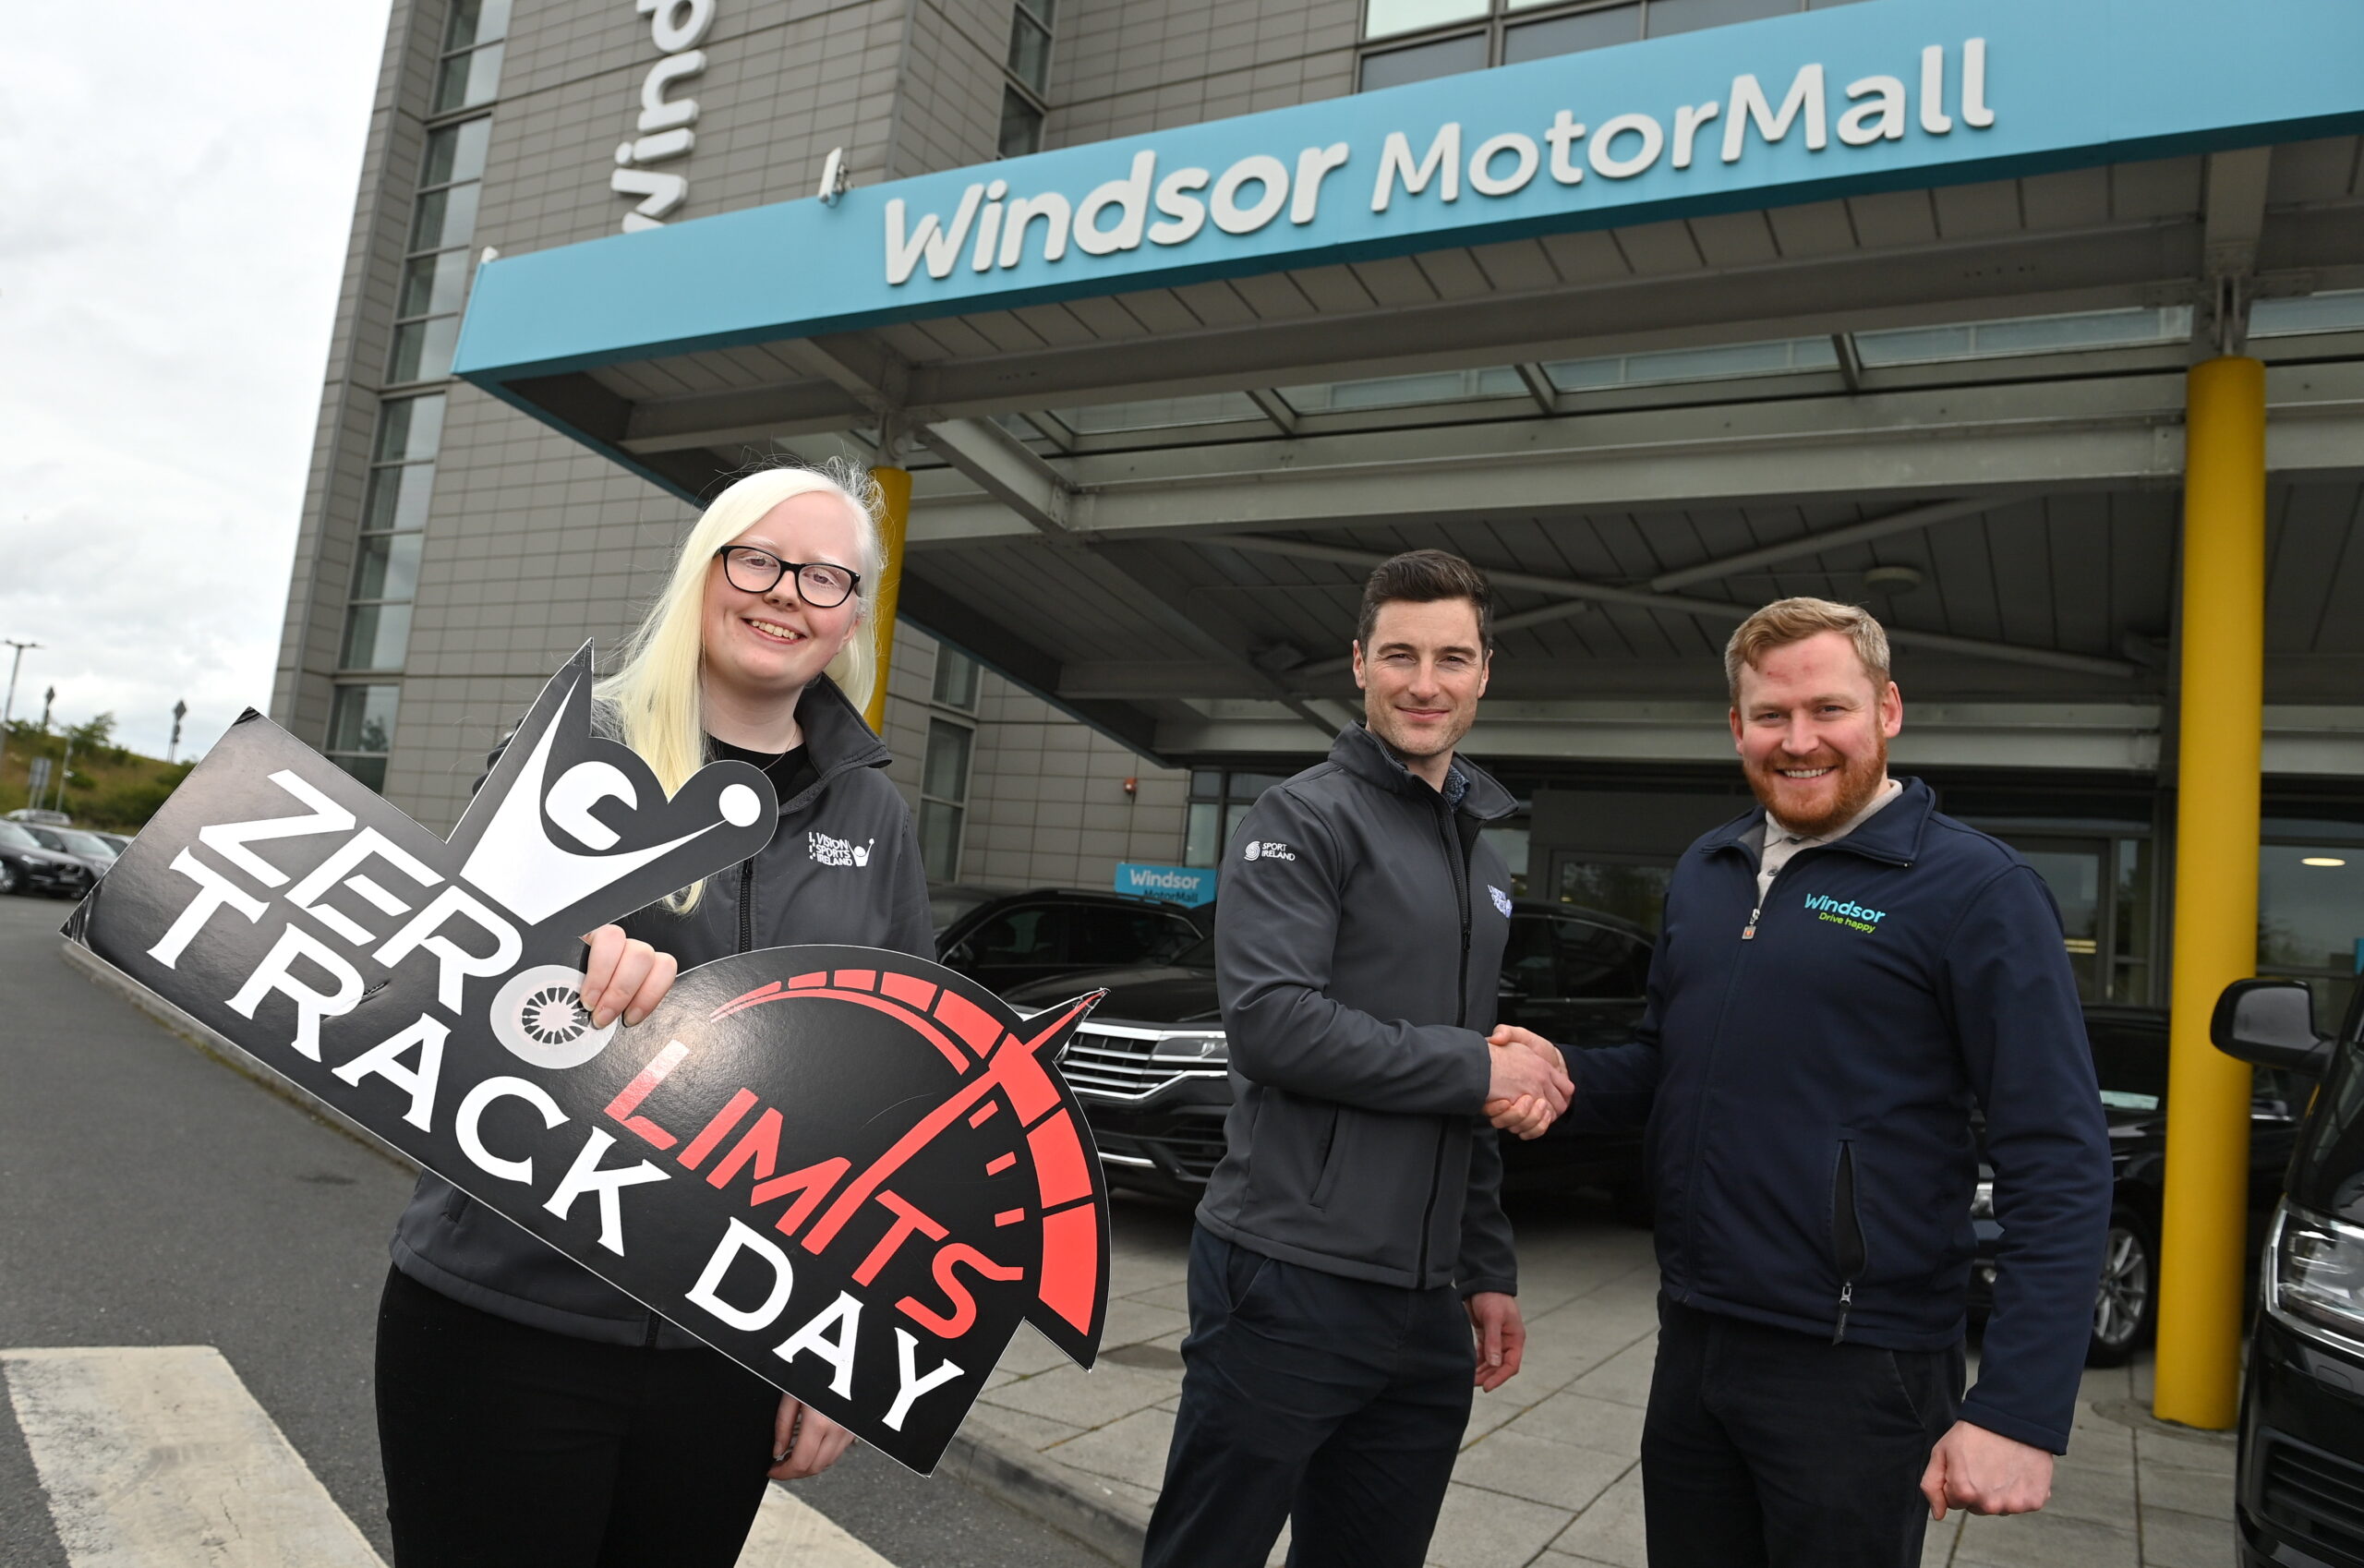 Sara McFadden stands to the left of the picture holding the Zero Limits logo sign. Vision Ireland's Aaron Mullaniff is to the right and he is shaking the hand of a representative from WIndsor Motors.